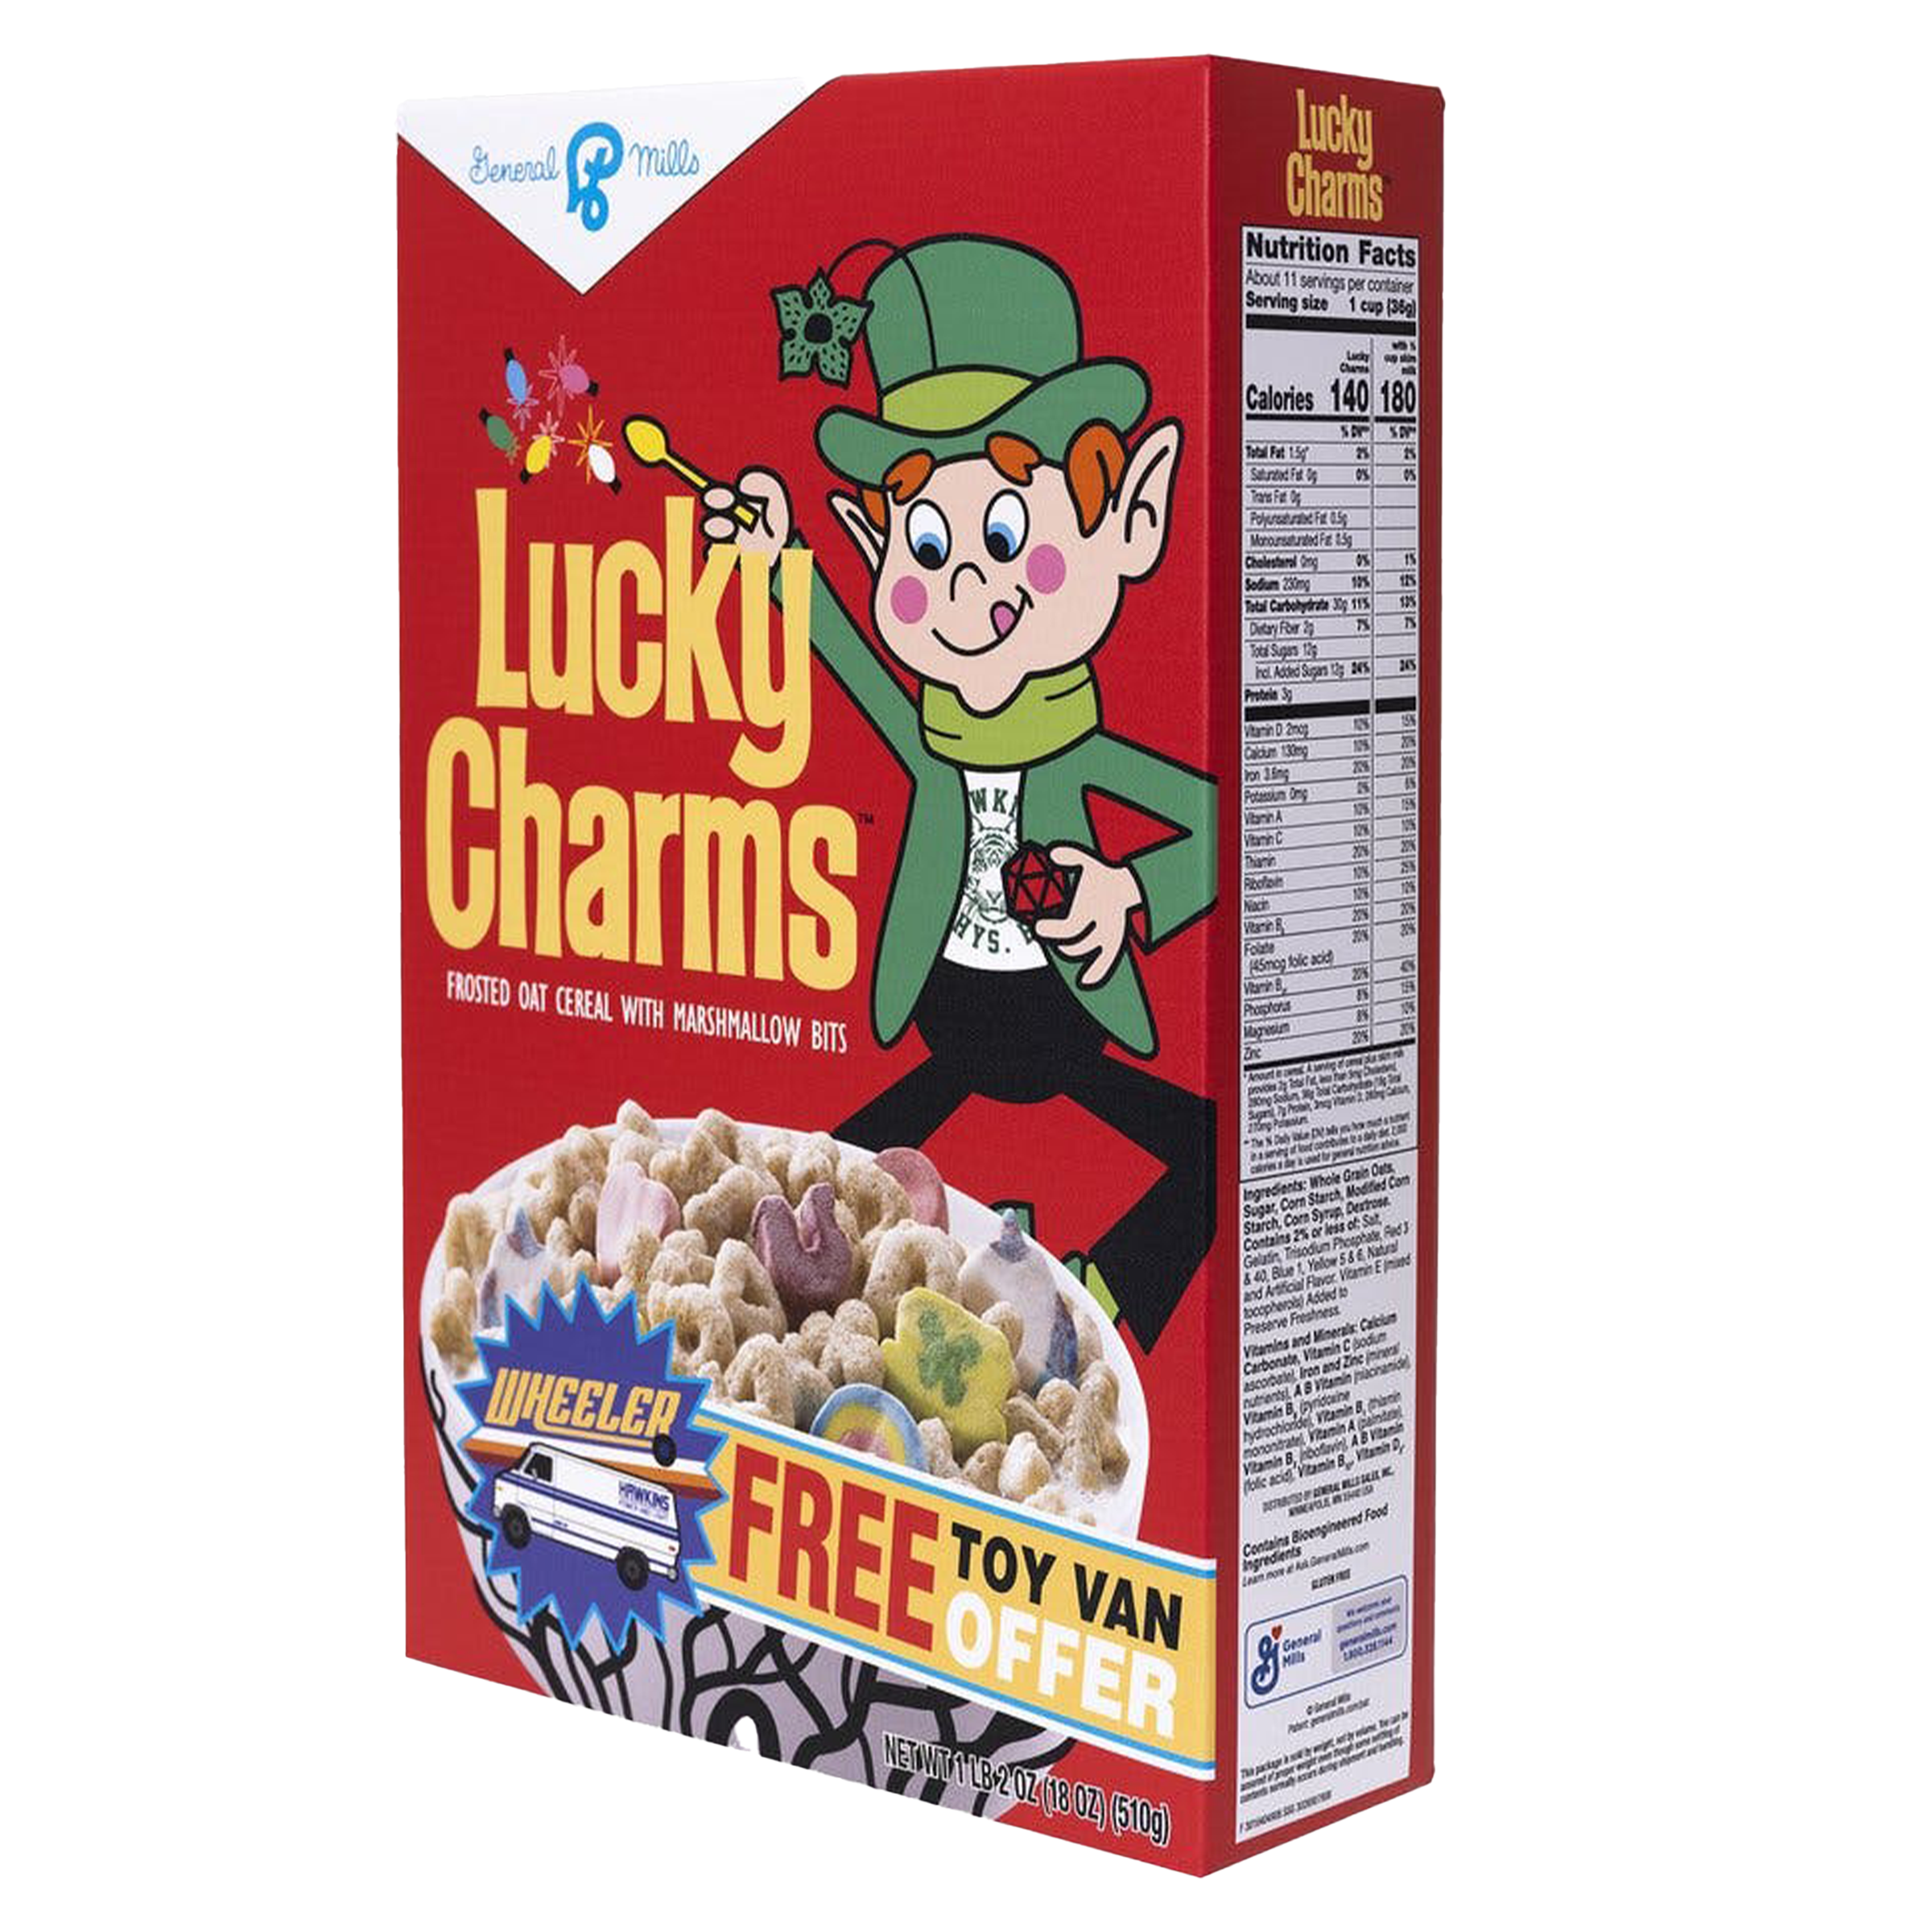 Netflix "Stranger Things" Cereal - Lucky Charms